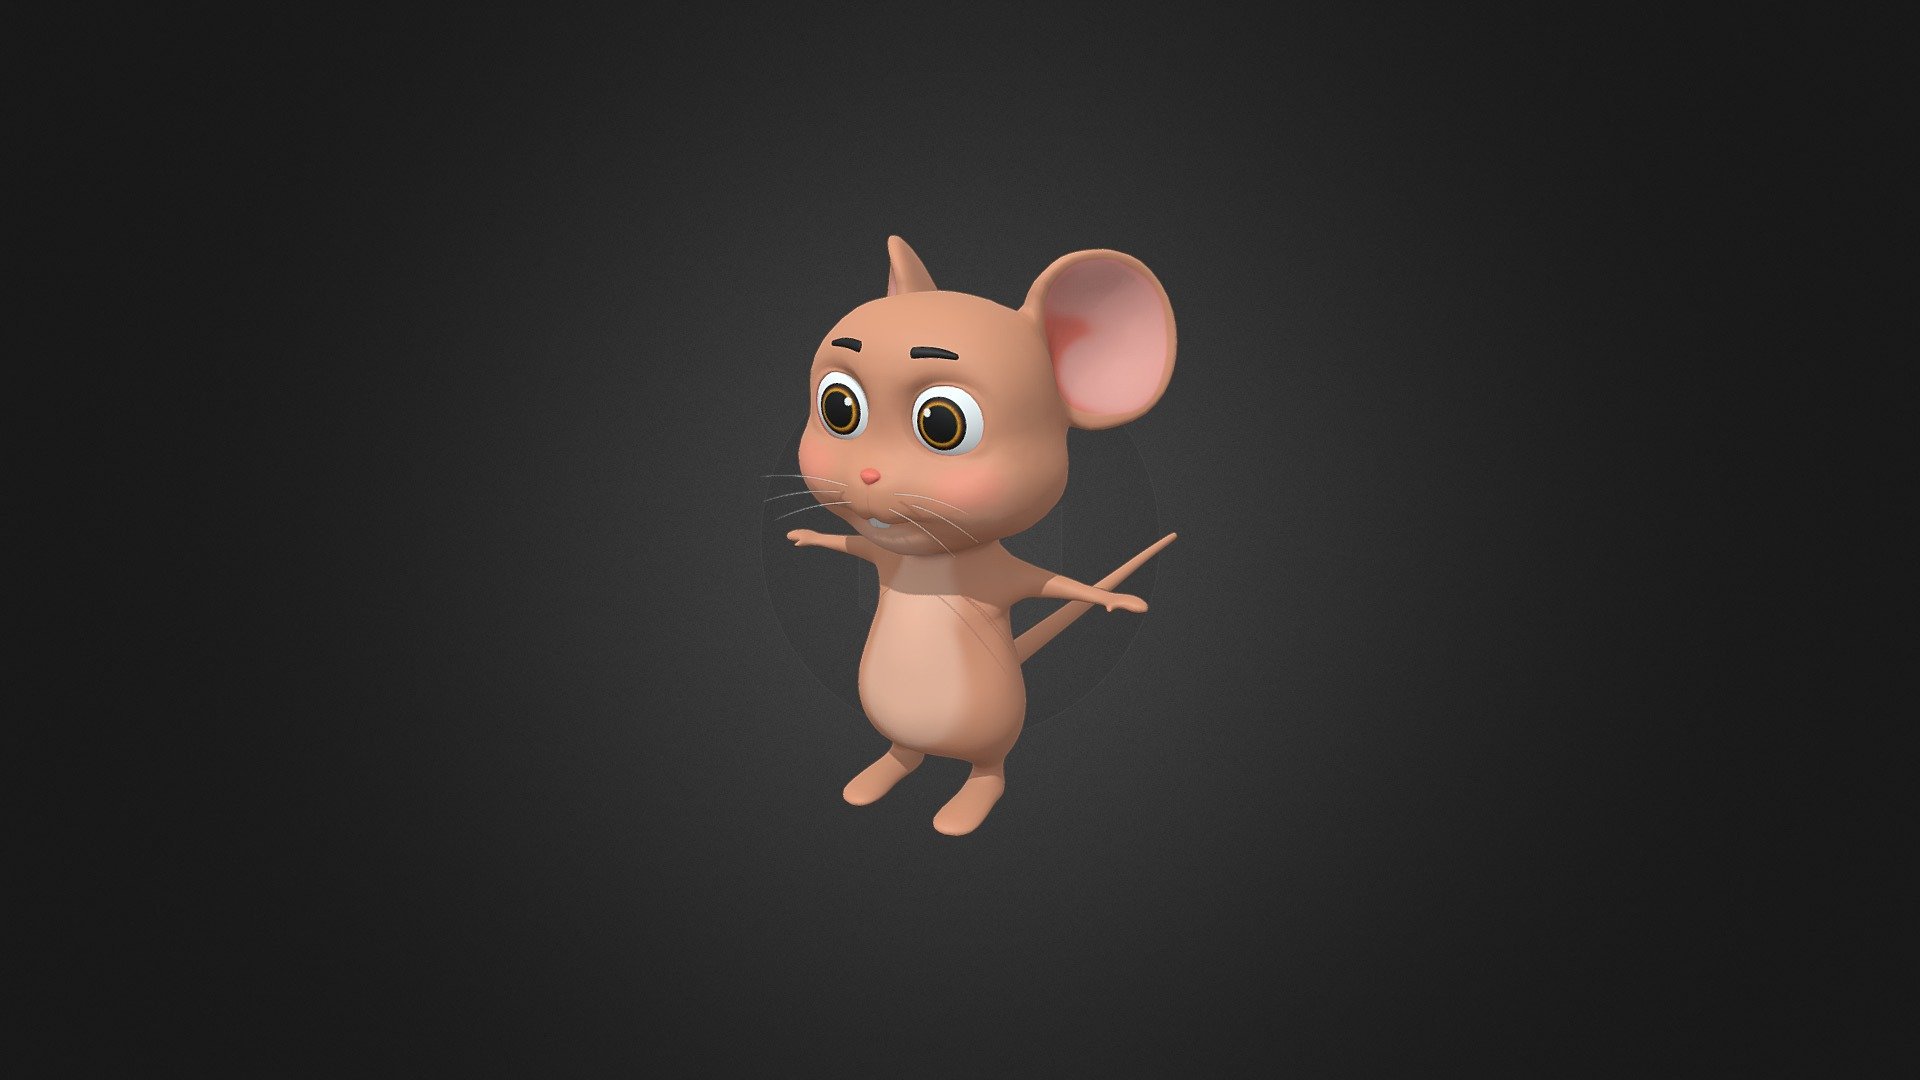 *Description




-3d model of Cartoons Little Mouse Rig.

-This 3D model is best for use in games.

-The model is equipped with all required PBR textures.

-Model is built with great attention to details and realistic proportions with correct geometry.

-Textures are very detailed so it makes this model good enough for close-up.

*Technical details:




-Full PBR textures sets. 

-The model is divided into few manys object.

-Model is completely unwrapped.

-Model is fully textured with all materials applied.

-Pivot points are correctly placed to suit optional animation process.

-Model scaled to approximate real world size (centimeters).

-All nodes, materials and textures are appropriately named.

*Rig:




-Advanced rigging for the face and body.

*Available file formats:




-Maya files and example render scenes.(packed and regular-unpacked)

-Maya (.ma)

-Autodesk FBX (.fbx)

*Additional Info:




-This model is not intended for 3D printing.
 - Asset - Cartoons - Animal - Little Mouse Rigged - Buy Royalty Free 3D model by InCom Studio (@incomstudio) 3d model